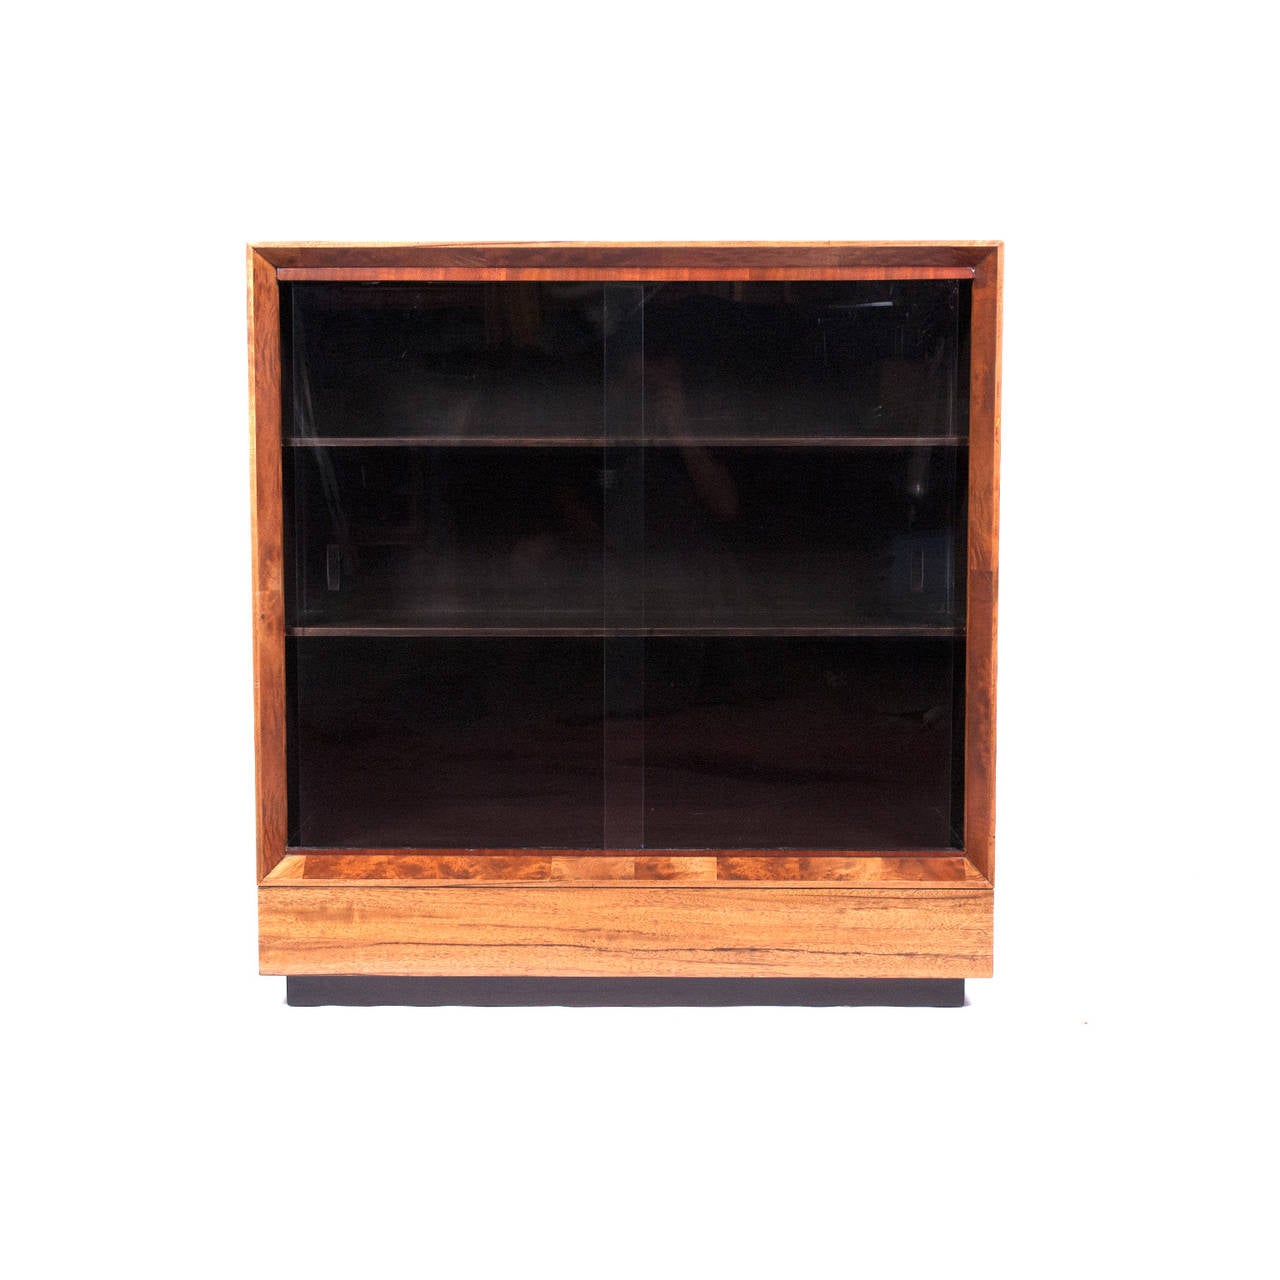 Bookcase in exotic paldao wood with two sliding glass doors and two interior shelves. Restored. Made by Herman Miller.